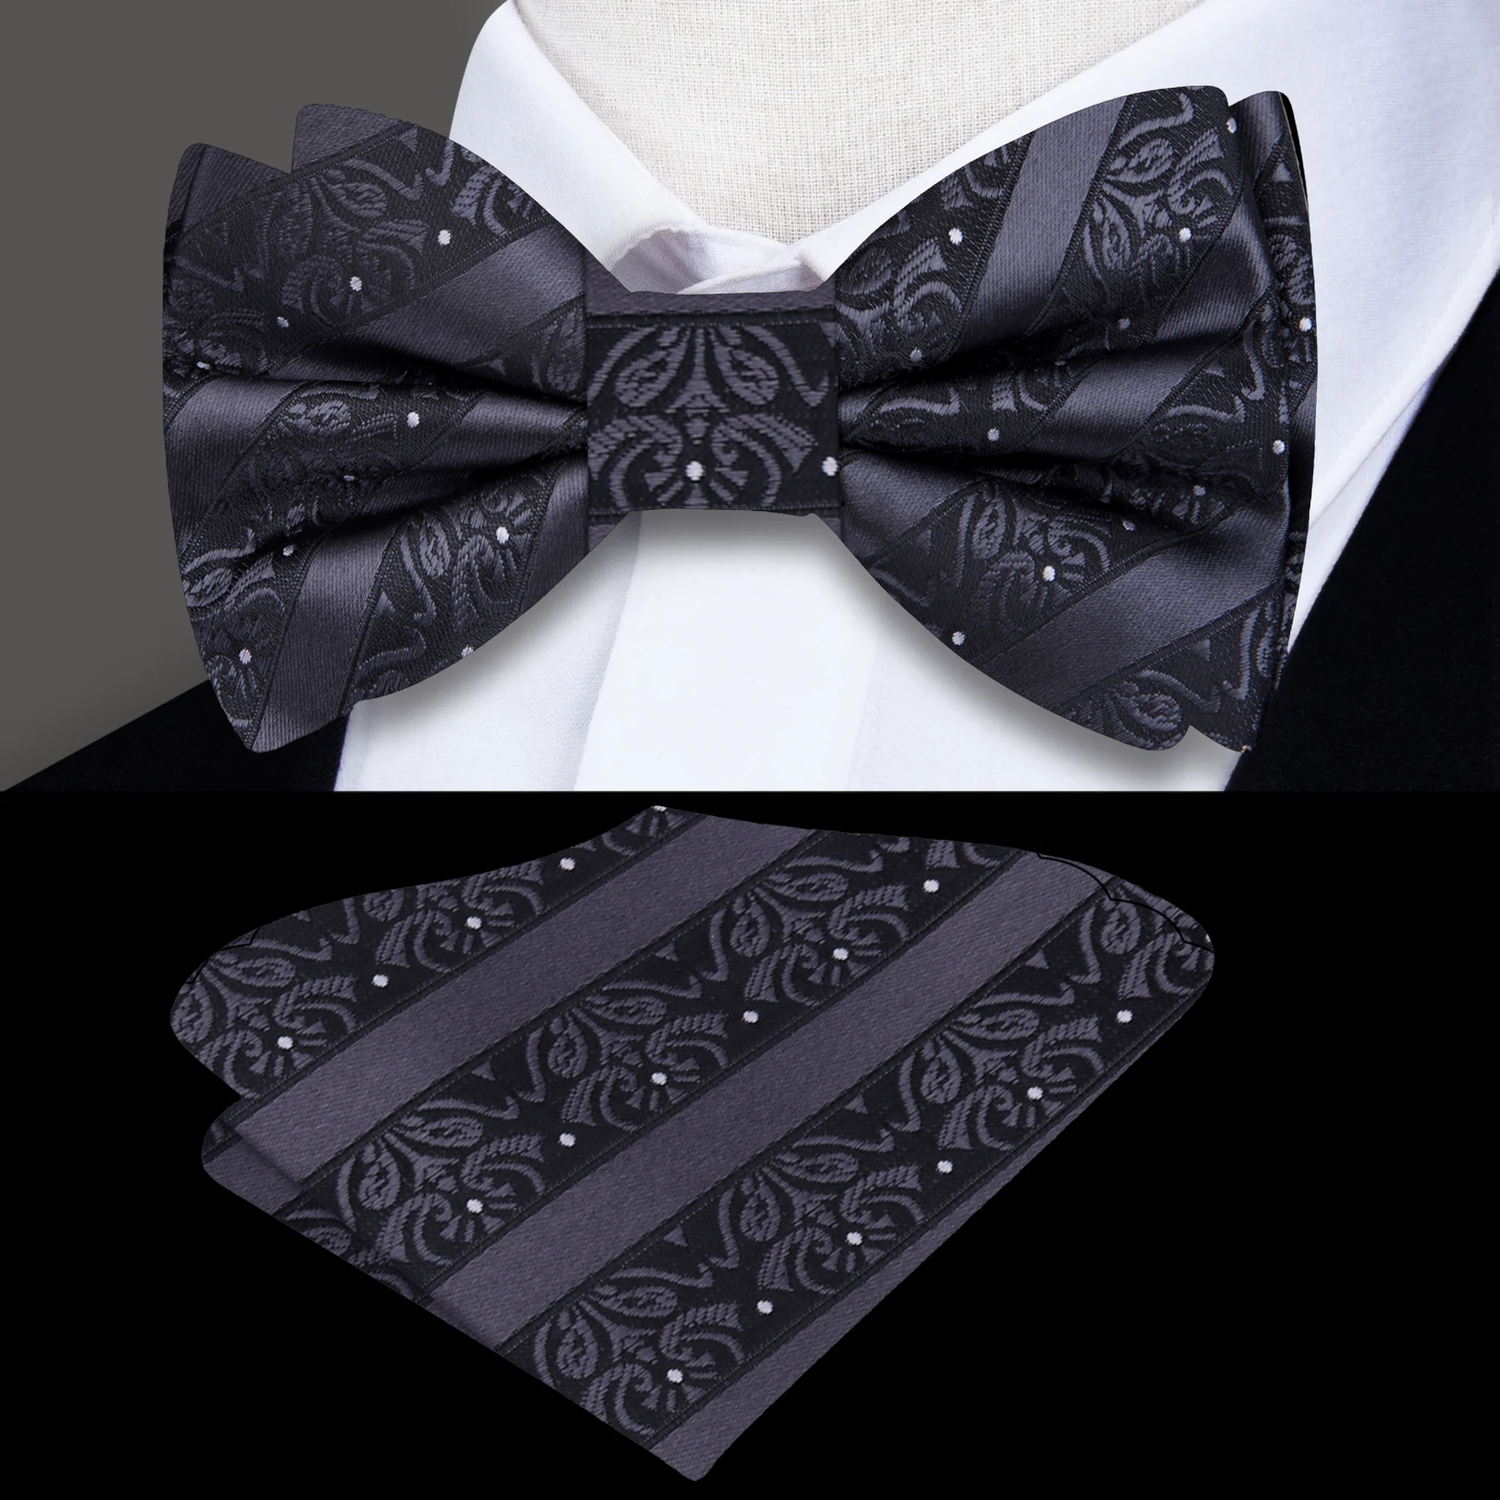 Black, White Dot Floral Texture Bow Tie and Square